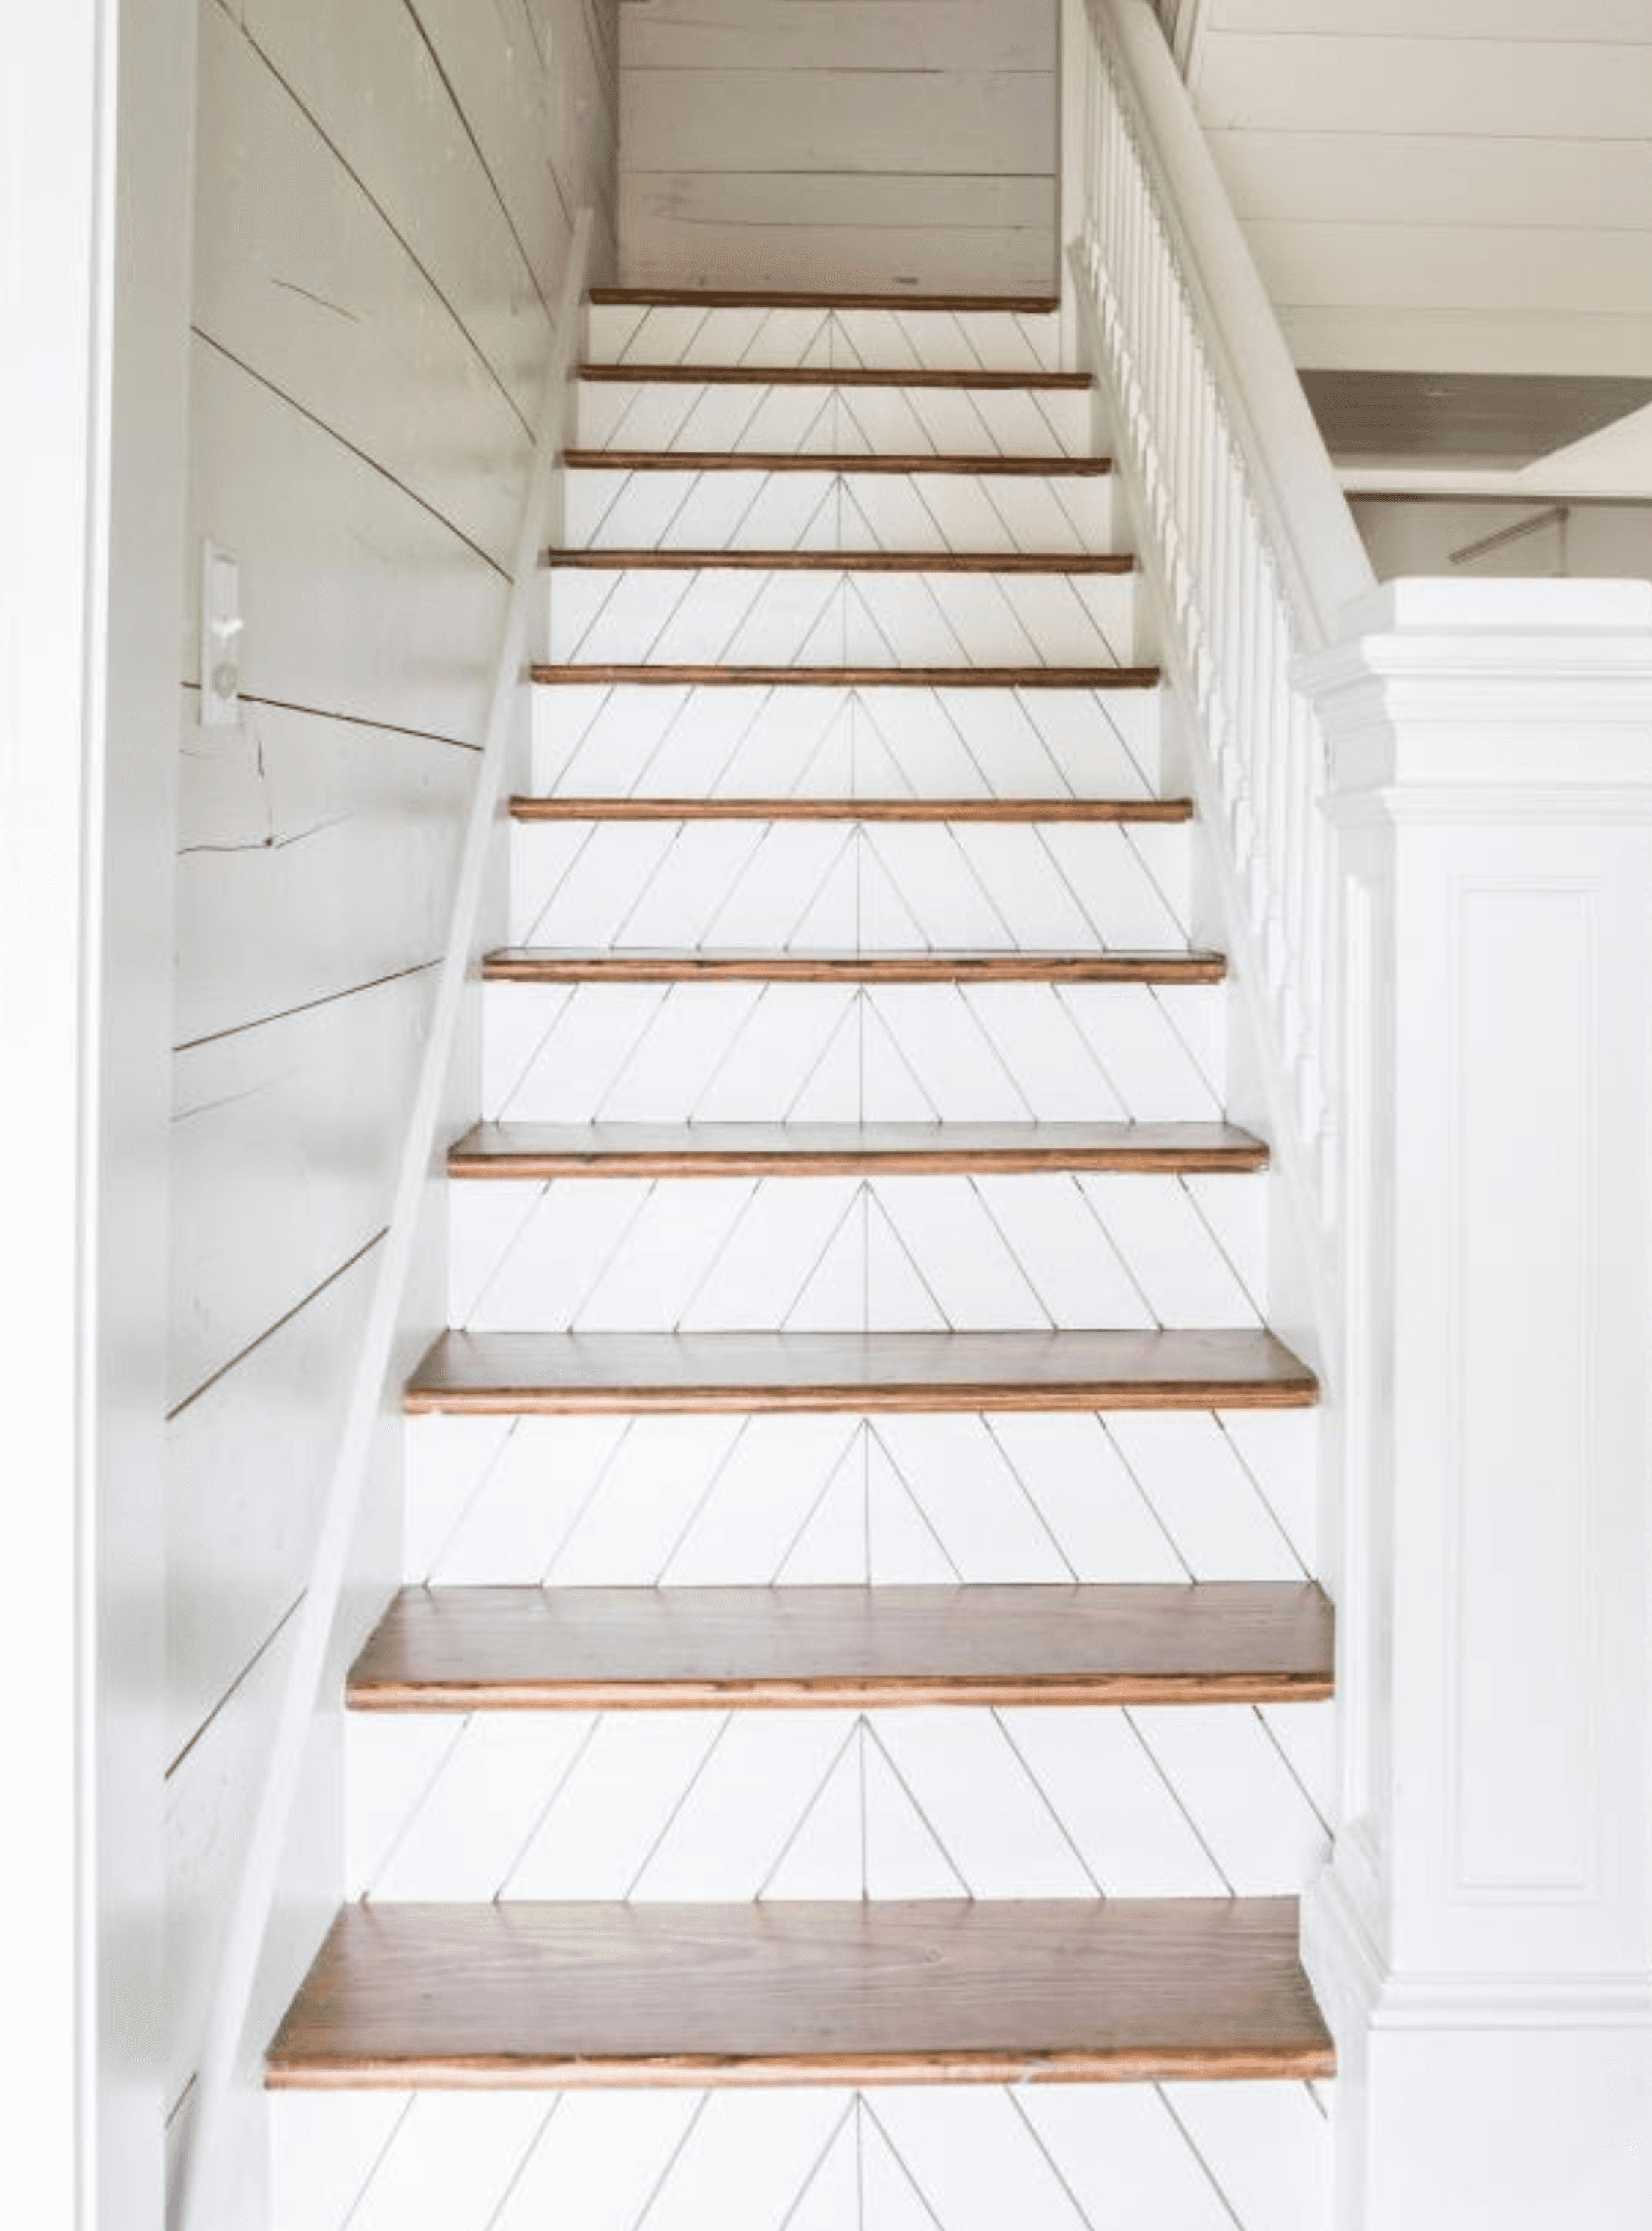 For Blog Only - Chip and Joanna Gaines, HGTV's Fixer Upper - Shiplap Staircase